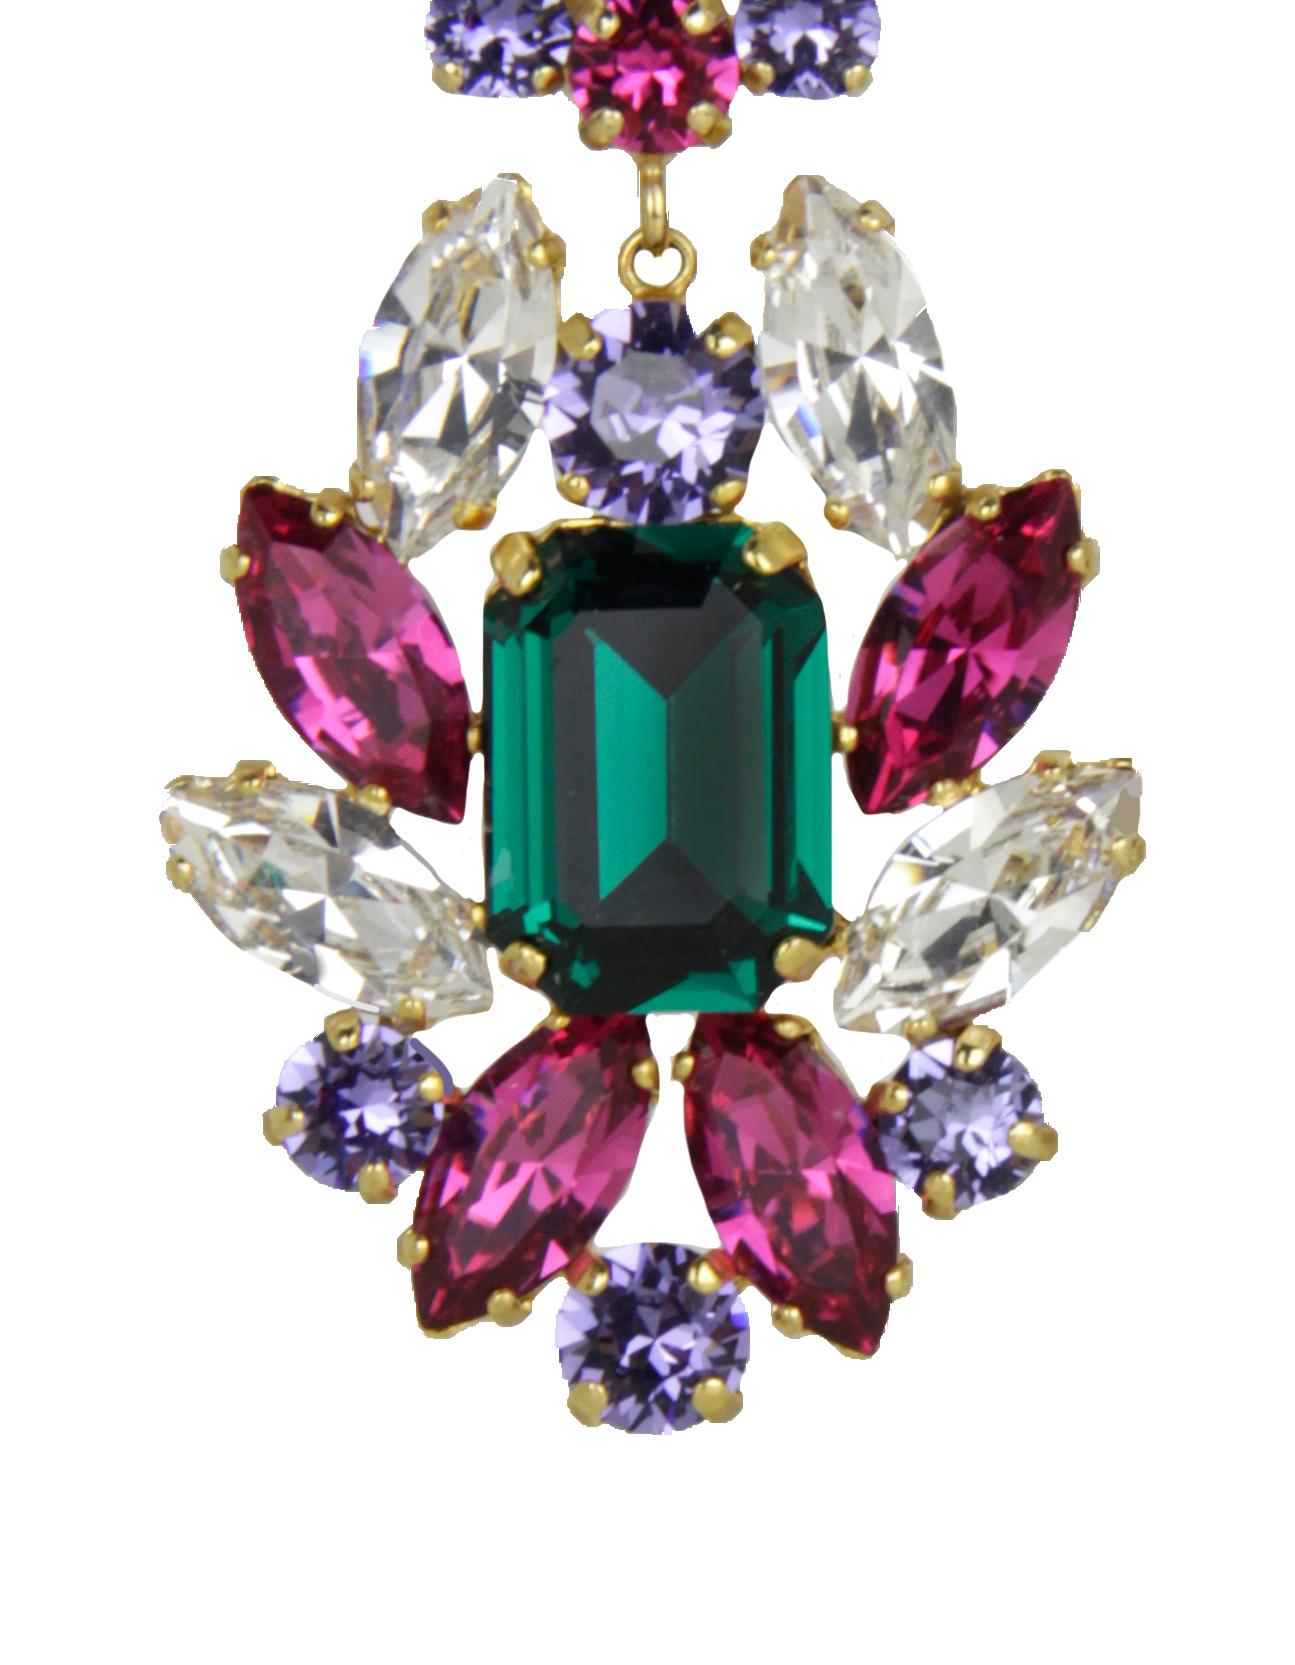 Dolce & Gabbana Multicolor Crystal Statement Earrings

Made In: Italy
Year of Production: 2018-2022
Color: Clear, green, pink, purple
Materials: Metal, crystal
Hallmarks: Dolce & Gabbana
Closure/Opening: Clip back
Overall Condition: